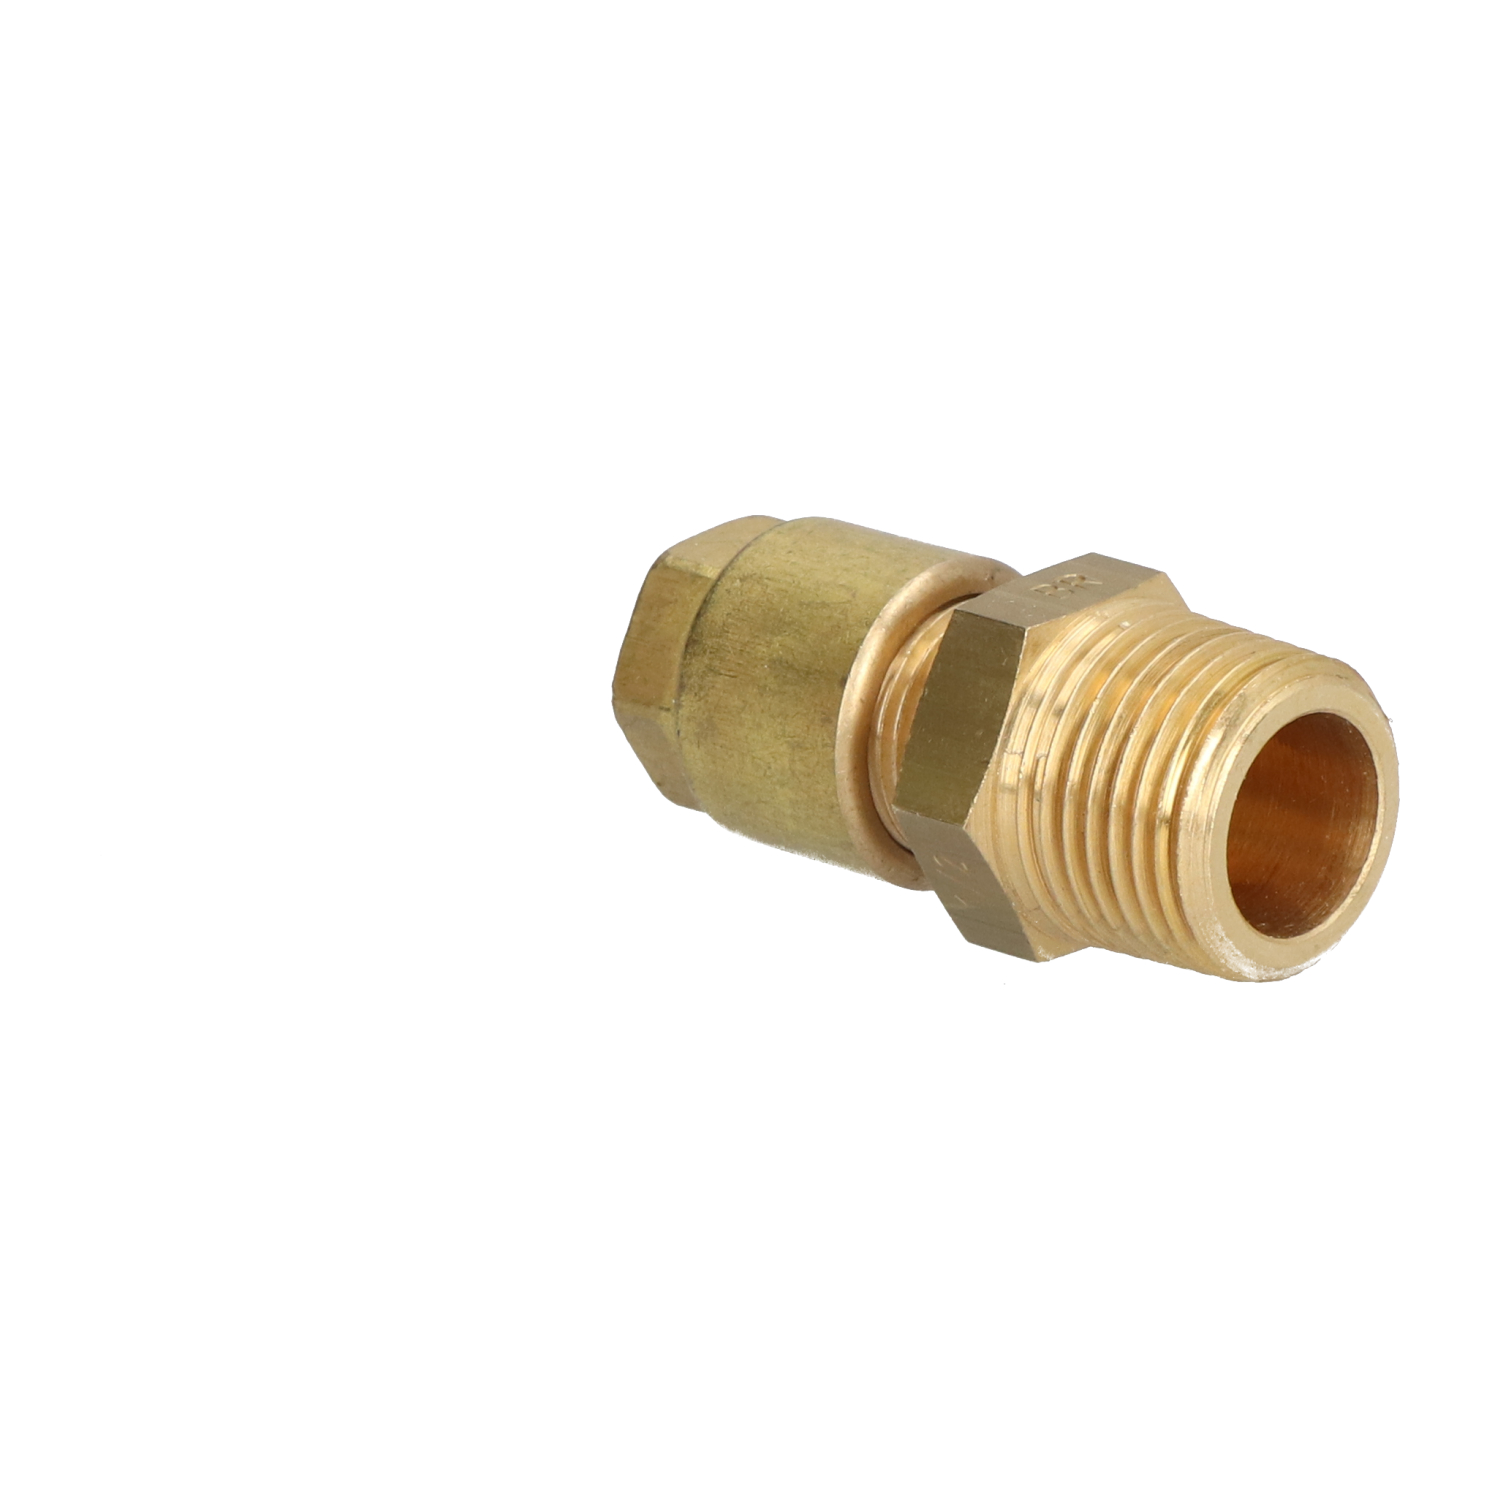 SERTO BR 1/4 YELLOW BRASS MALE COMPRESSION FITTING CONNECTOR (LOT OF 5)